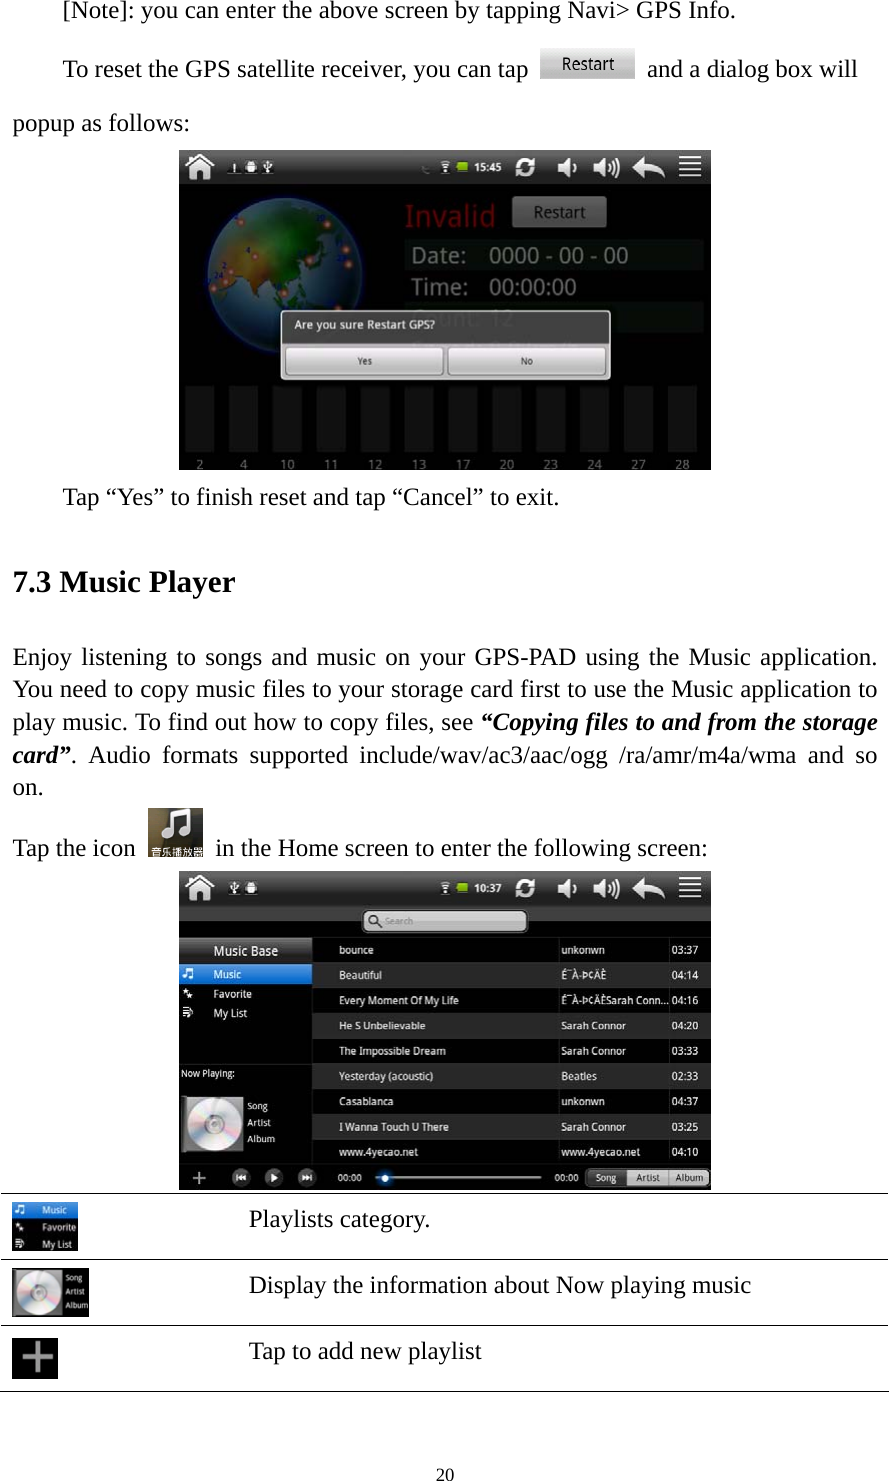 20 [Note]: you can enter the above screen by tapping Navi&gt; GPS Info. To reset the GPS satellite receiver, you can tap    and a dialog box will popup as follows:  Tap “Yes” to finish reset and tap “Cancel” to exit. 7.3 Music Player Enjoy listening to songs and music on your GPS-PAD using the Music application. You need to copy music files to your storage card first to use the Music application to play music. To find out how to copy files, see “Copying files to and from the storage card”. Audio formats supported include/wav/ac3/aac/ogg /ra/amr/m4a/wma and so on.  Tap the icon    in the Home screen to enter the following screen:     Playlists category.  Display the information about Now playing music  Tap to add new playlist 